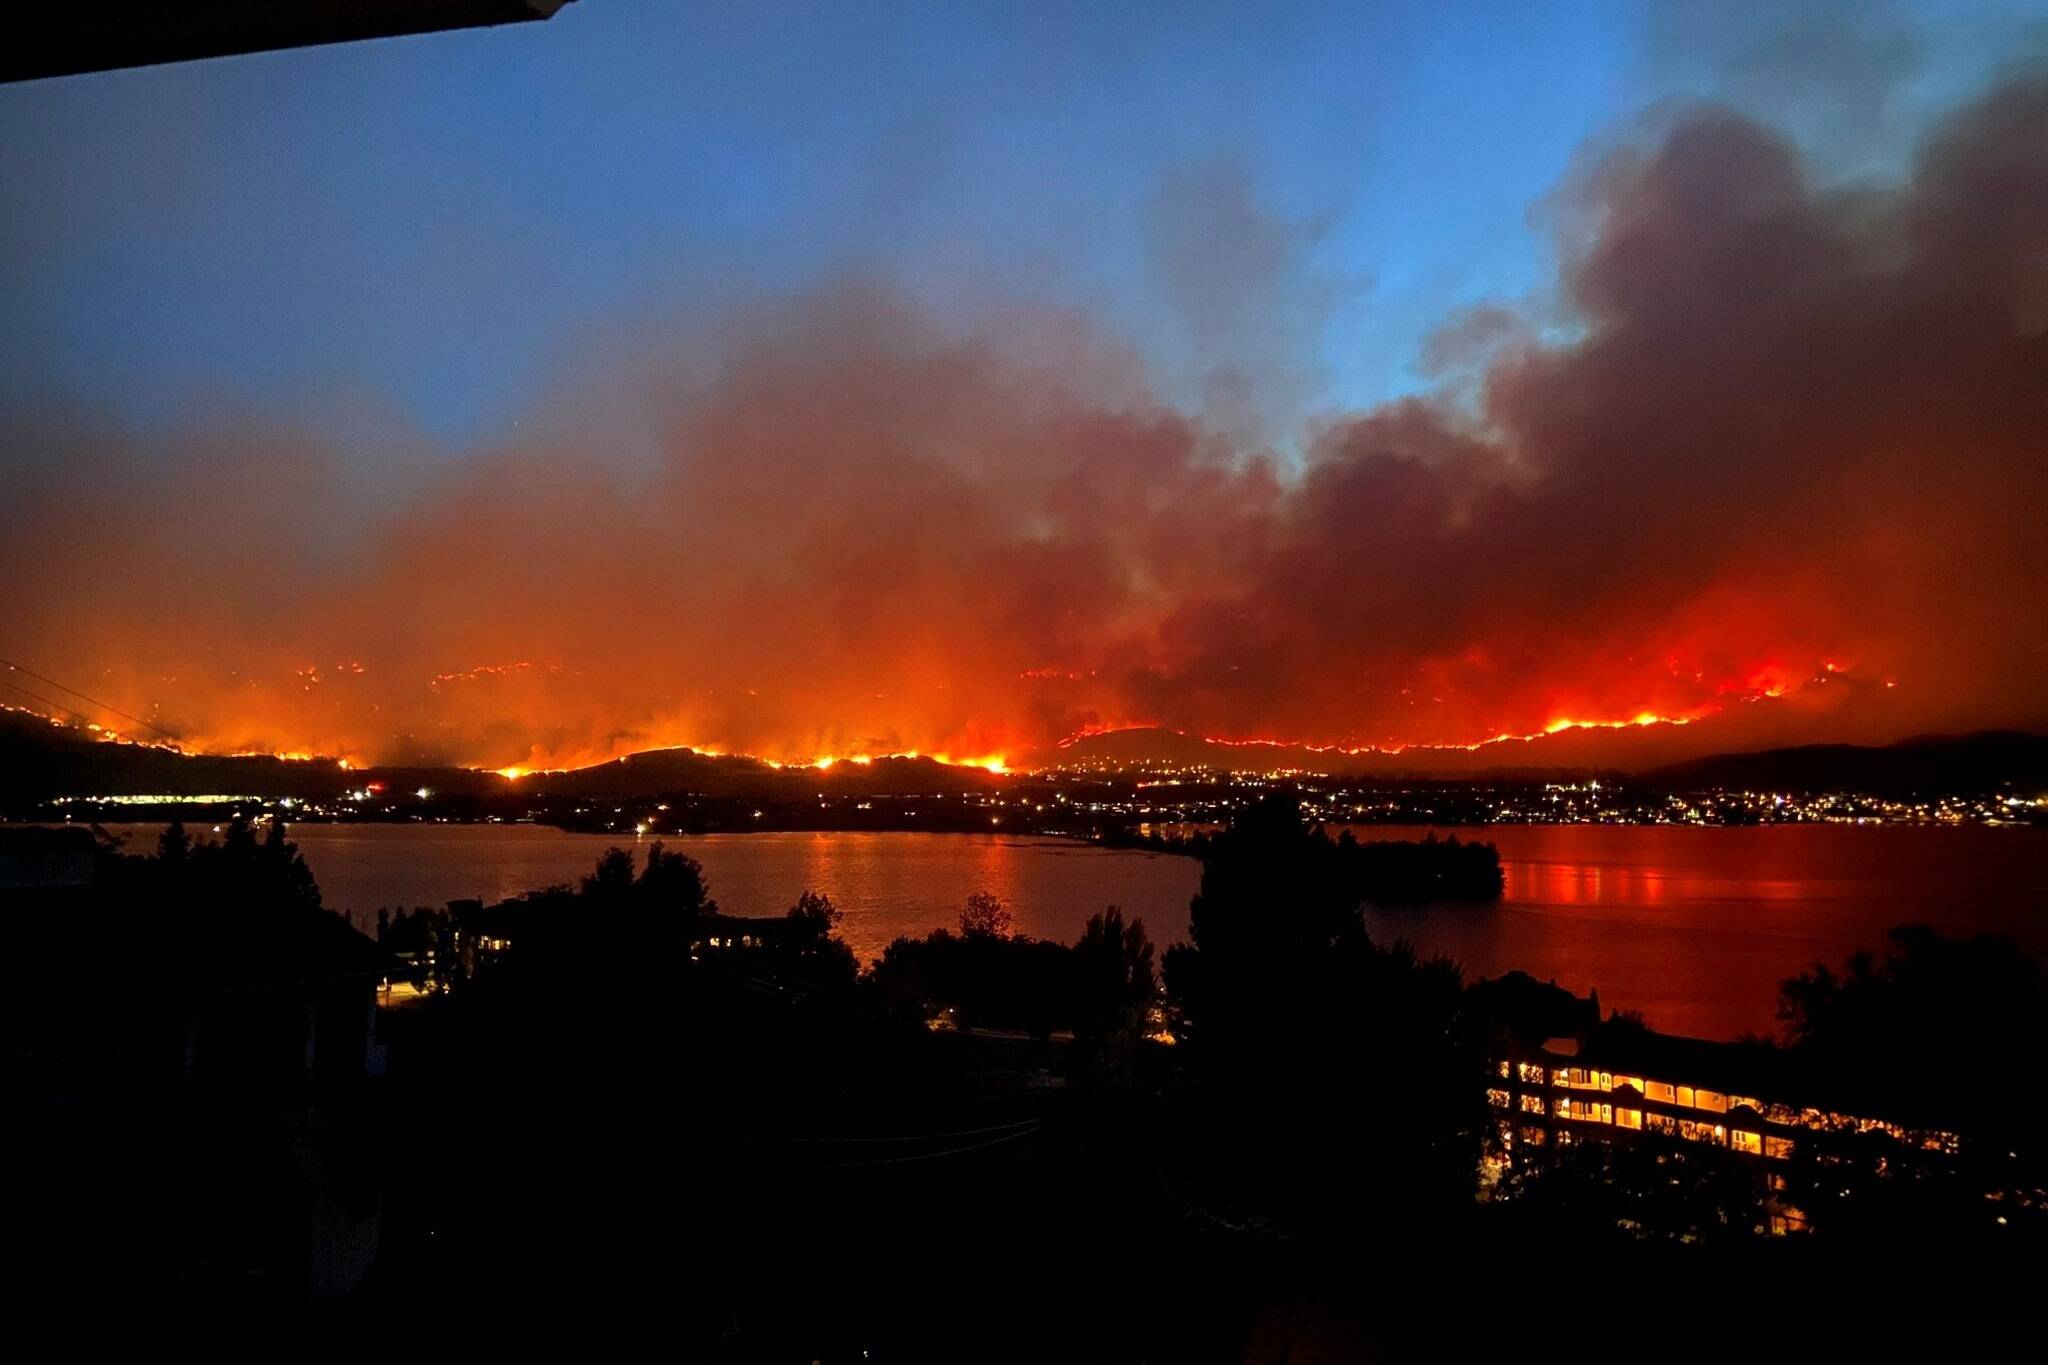 This photo from shortly before 10 p.m. on July 29 on the east side of Osoyoos shows the size of the fire threatening the community. (Kristine Fujita via Paul Scholz - Twitter)